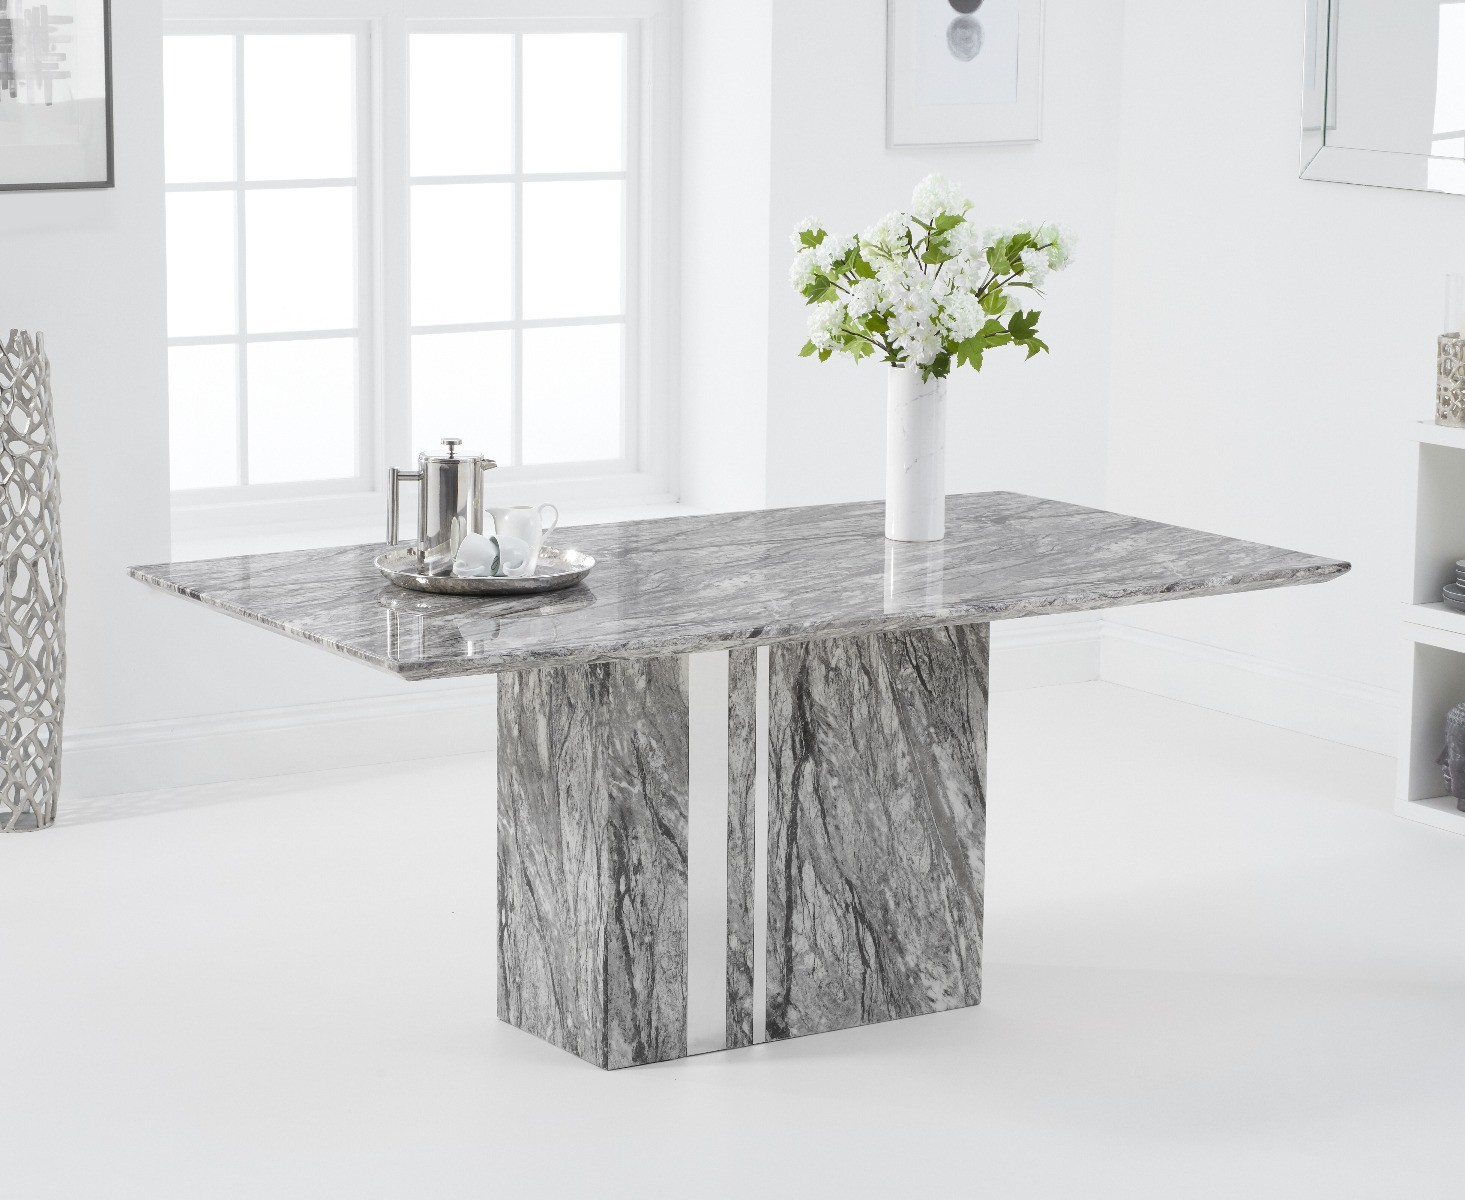 Photo 2 of Alicia 180cm grey marble dining table with 6 grey austin chairs